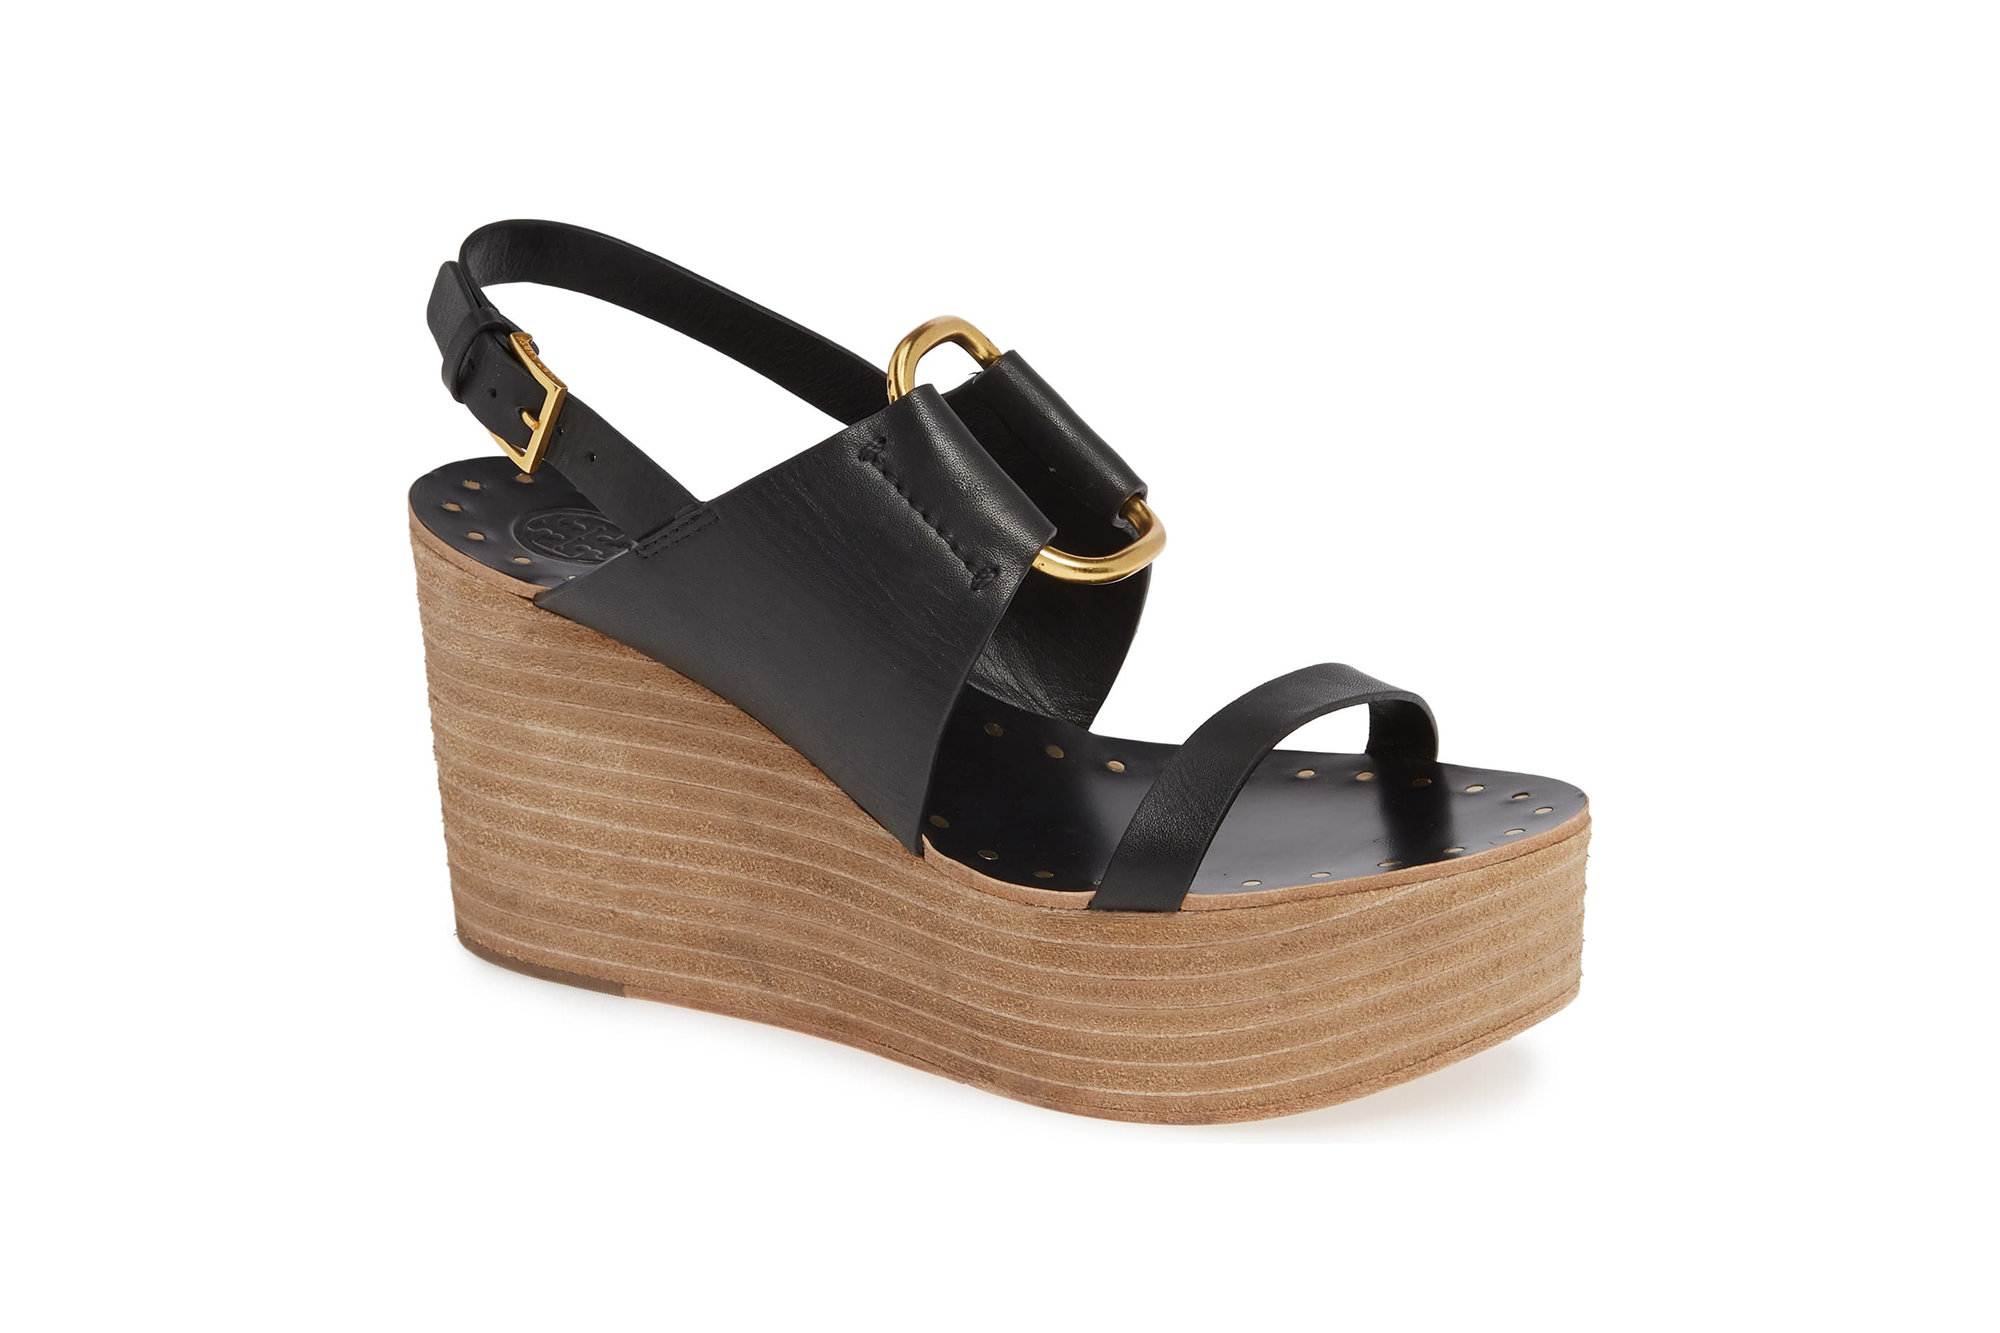 Drop Everything! These Stunning Tory Burch Sandals Are 50% Off!